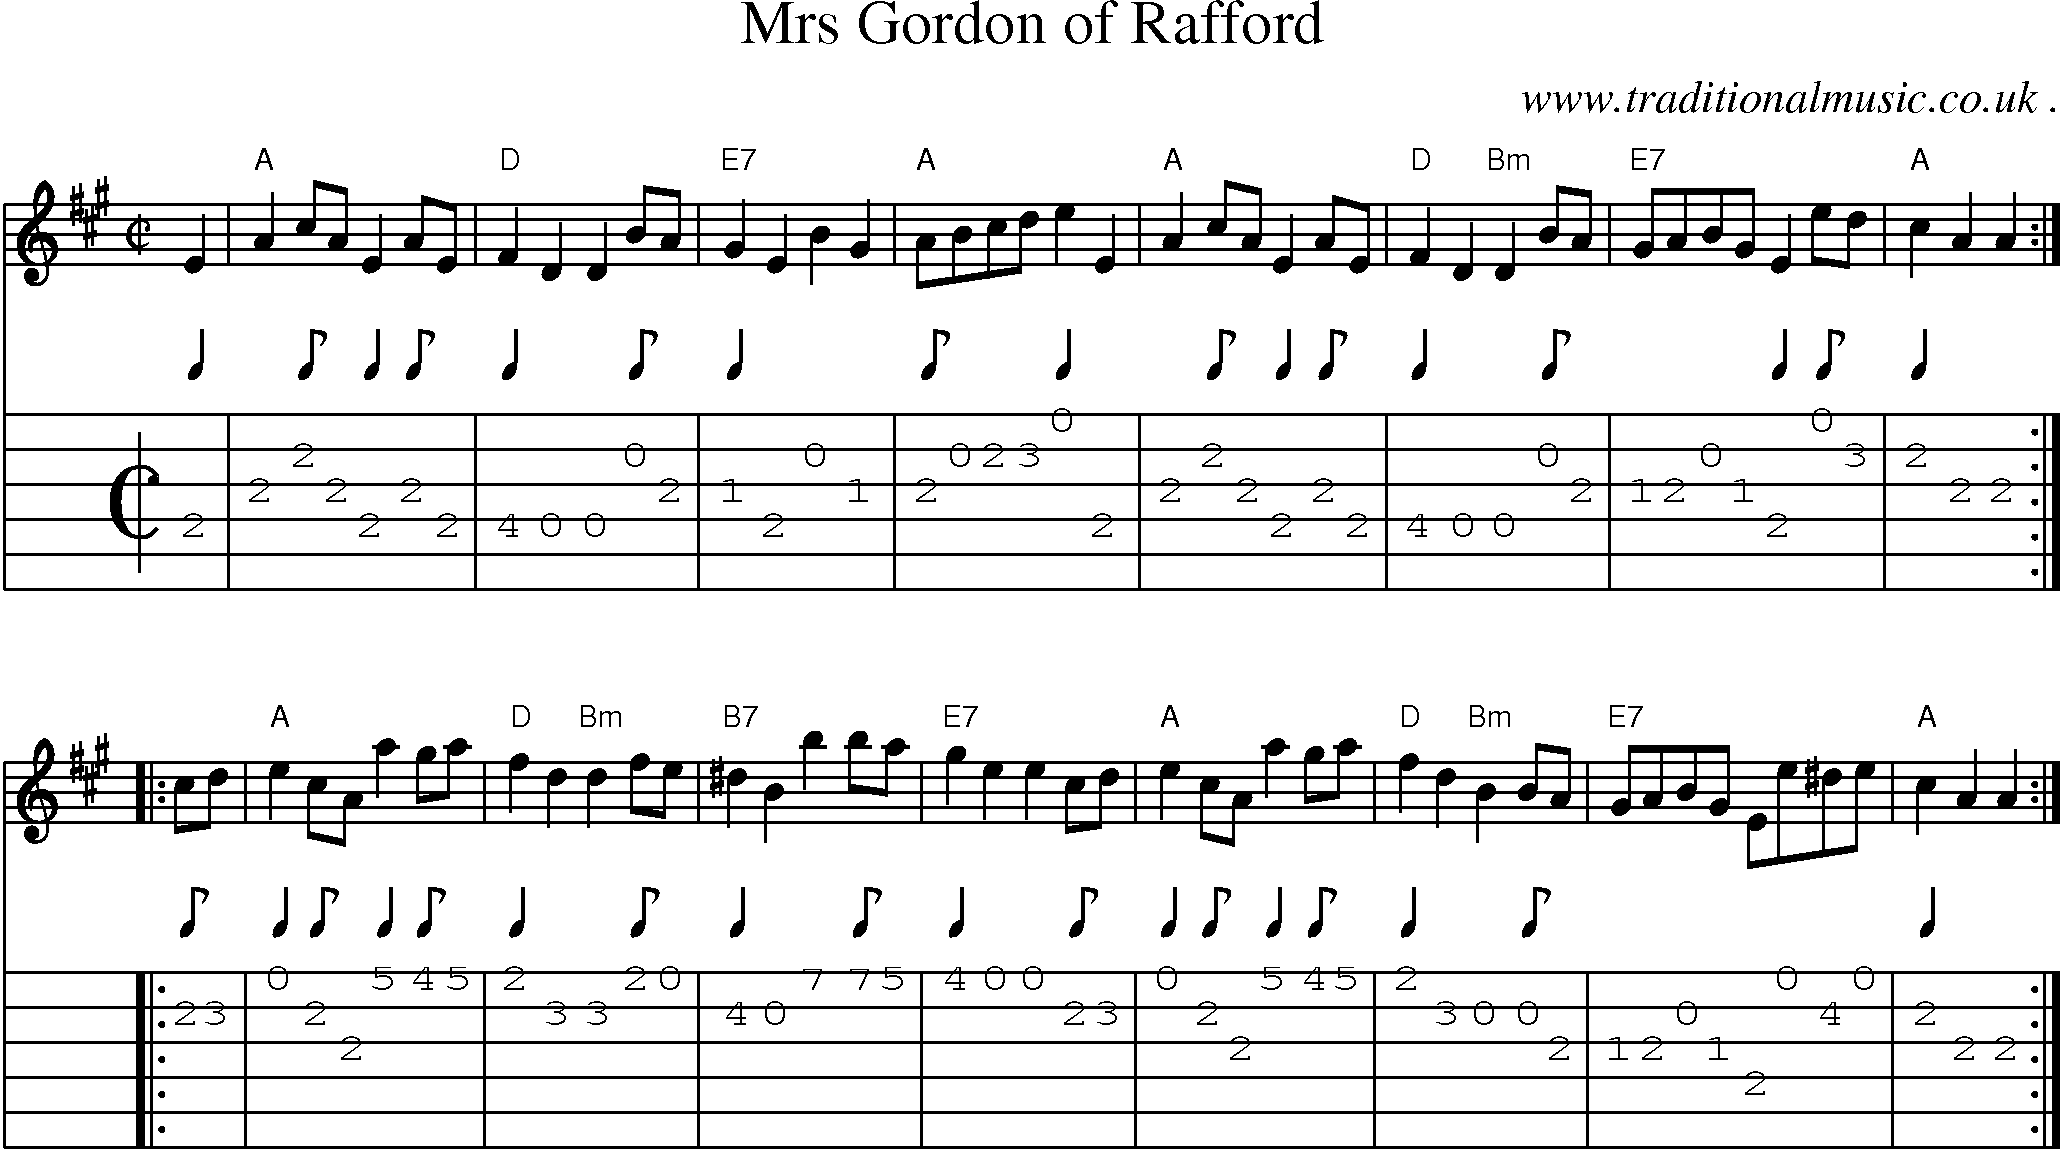 Sheet-music  score, Chords and Guitar Tabs for Mrs Gordon Of Rafford